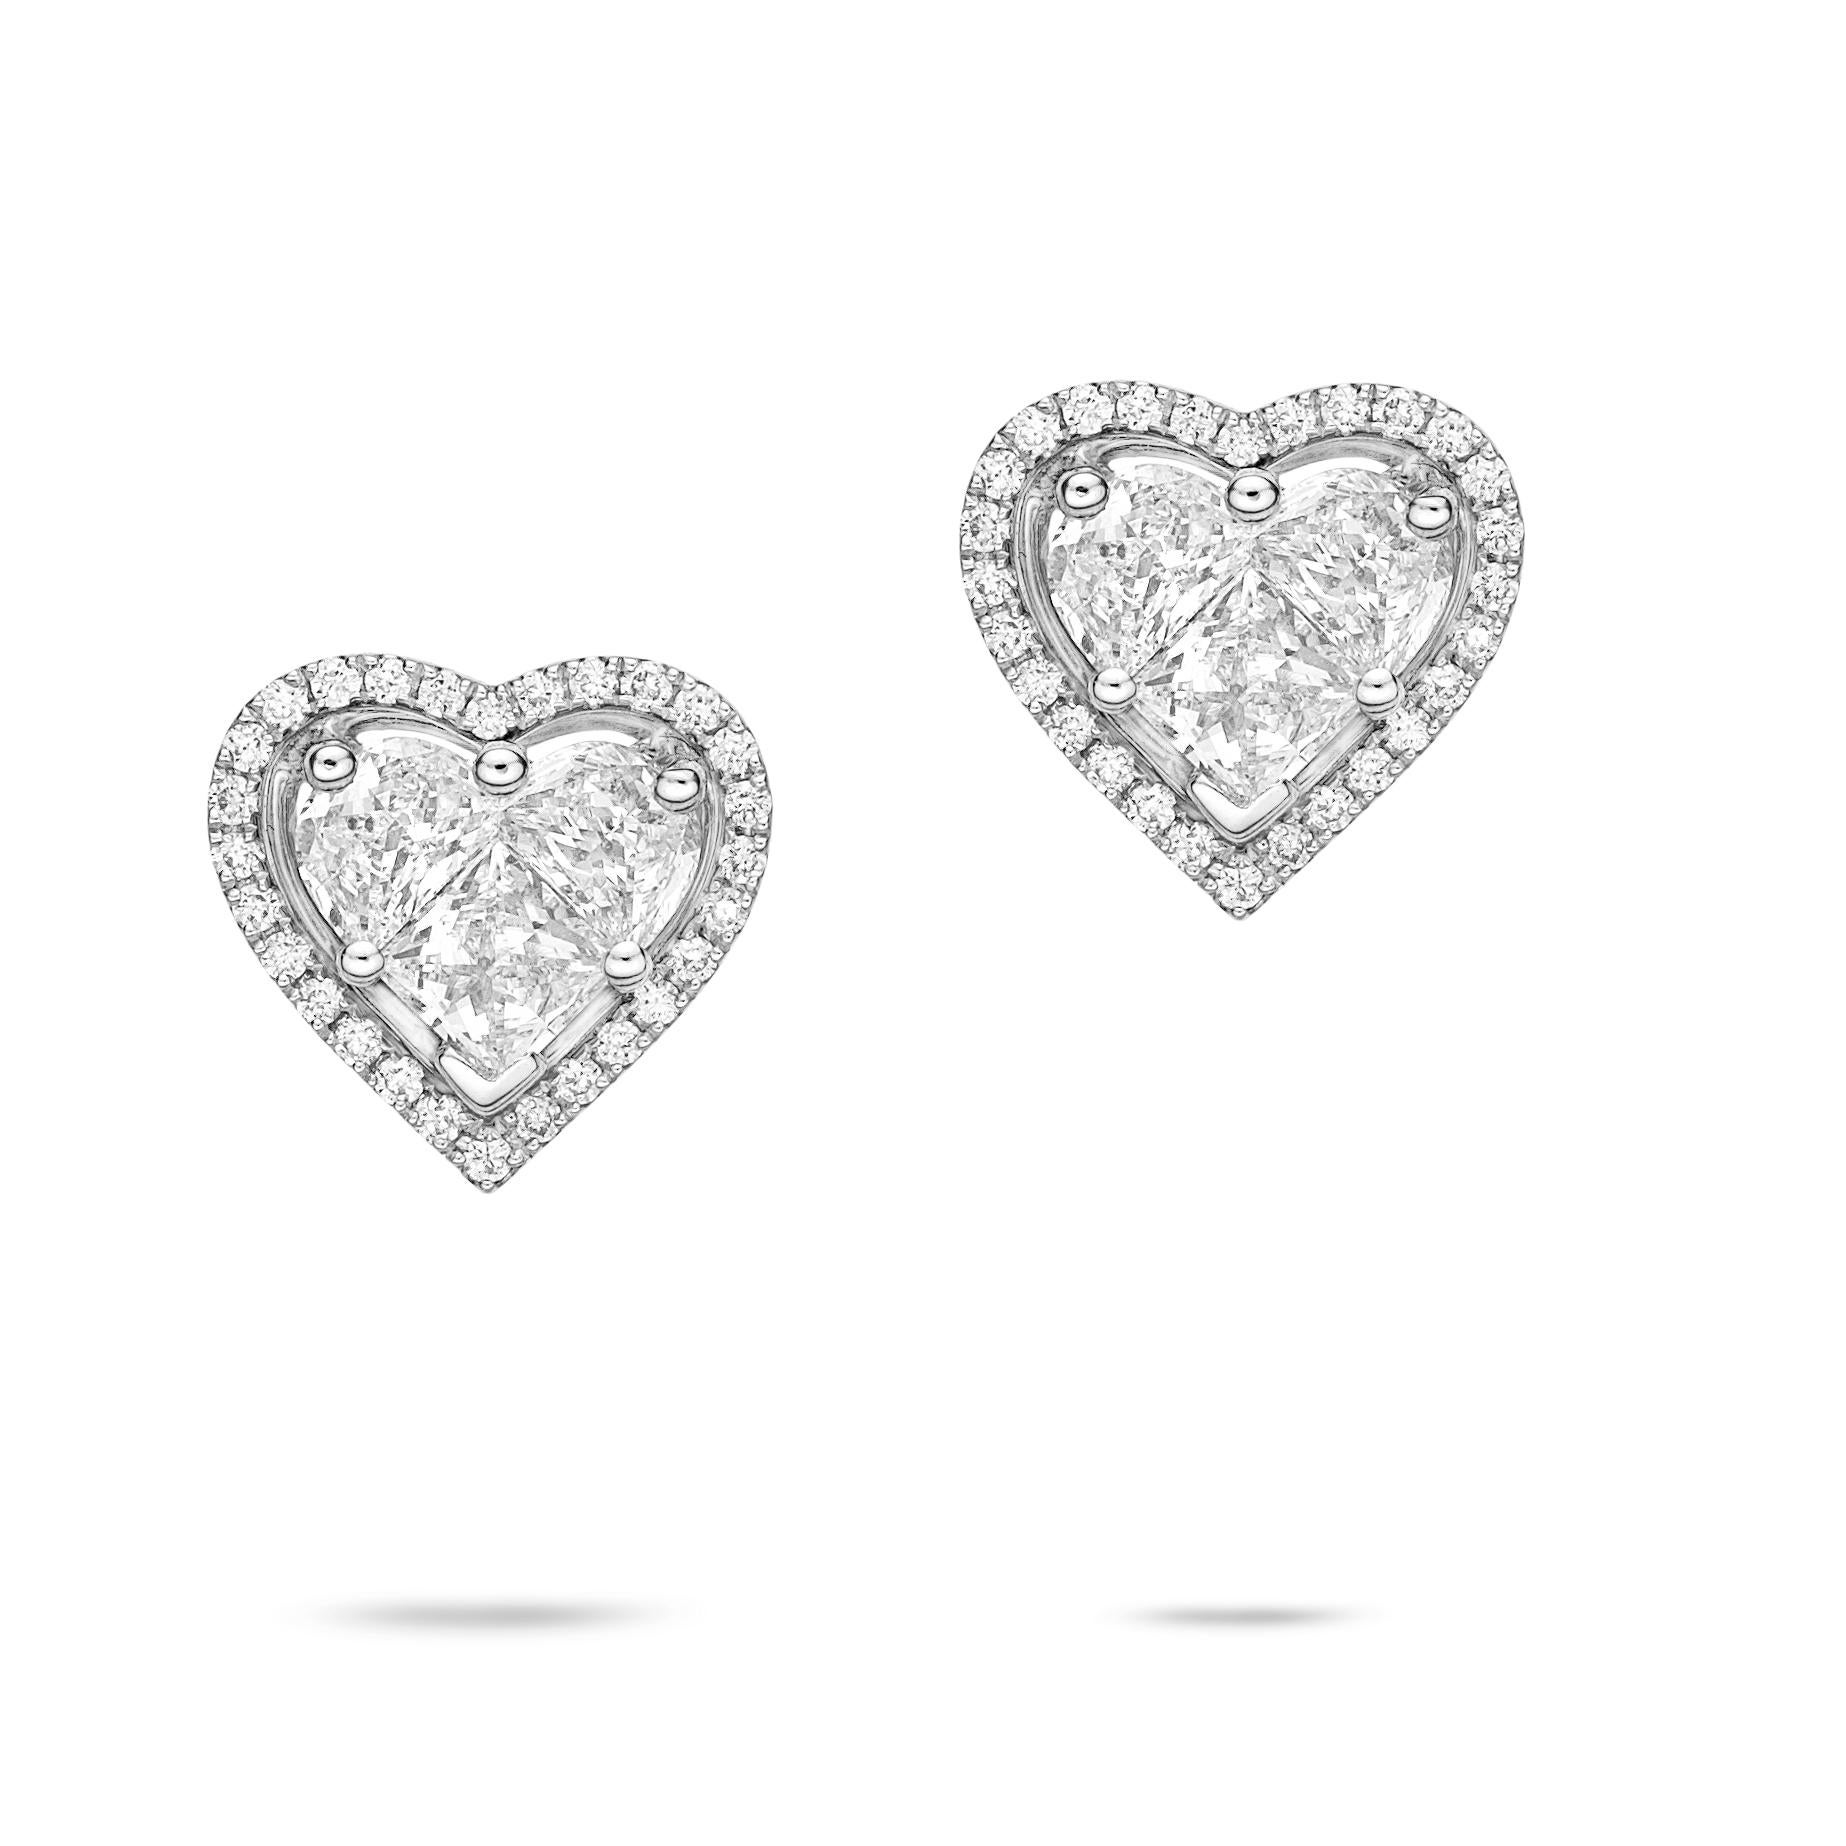 Hearts and diamonds are a match made in romantic heaven. Hearts display the tenderest of human emotions while the diamond symbolizes permanence and durability.

The earring setting with 62 piece diamond total weight 1.01 carat, made in 18K white